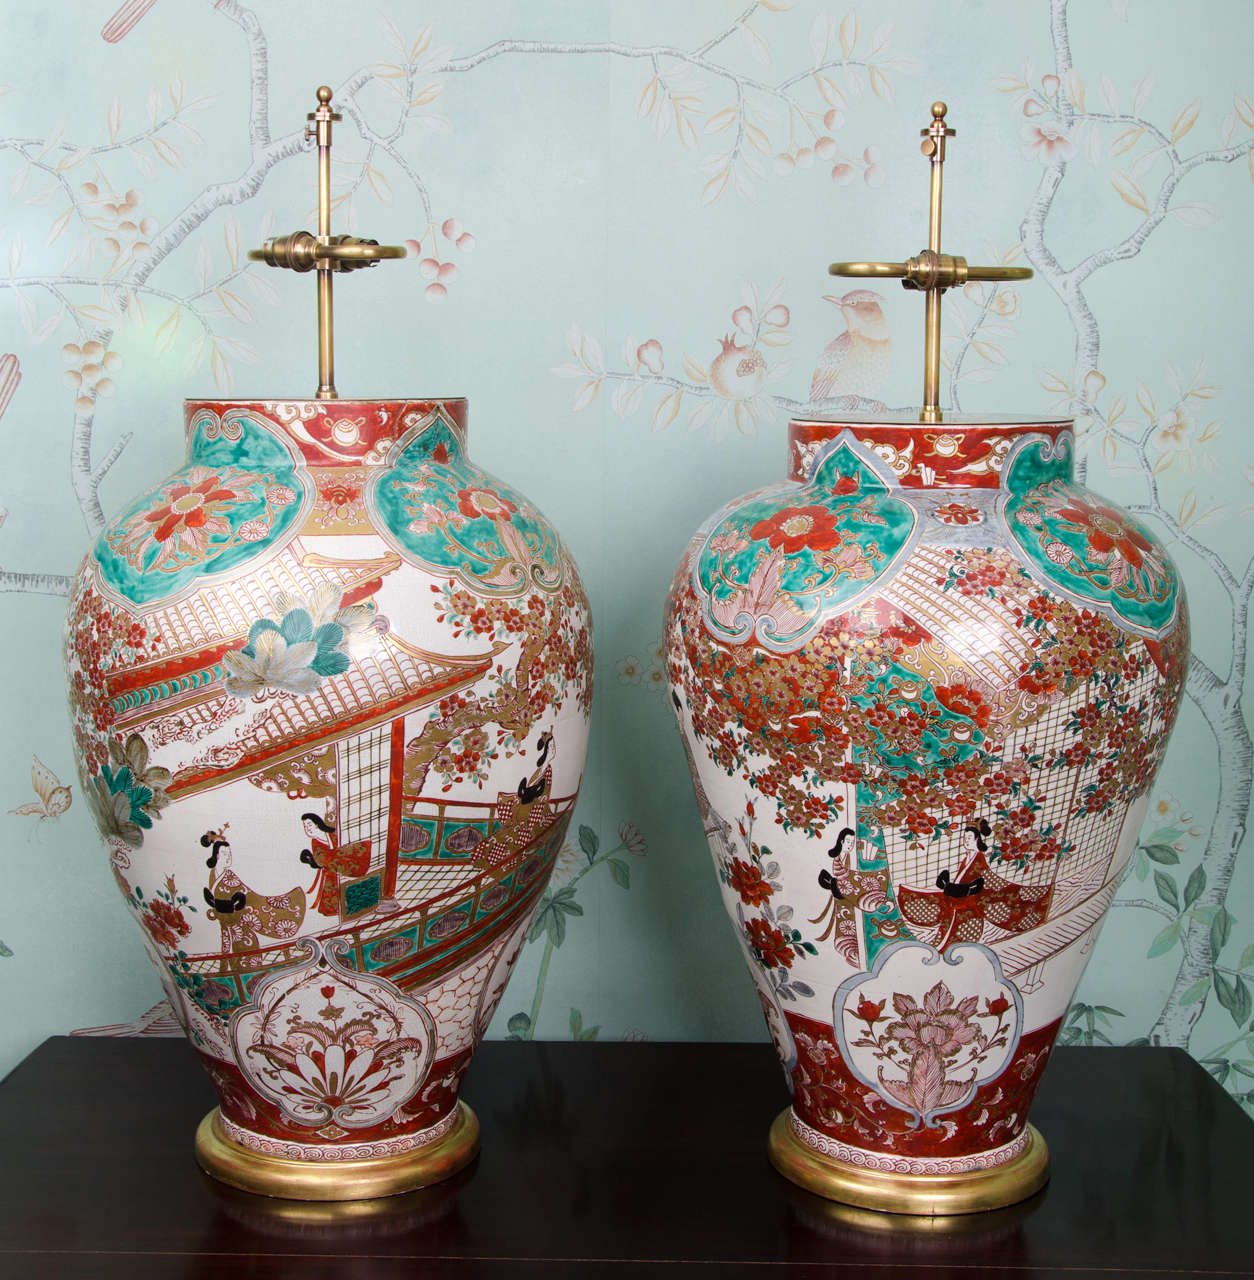 A pair of very large and impressive Japanese late 17th / early 18th century Imari vases decorated in the rare palette of underglaze red (two shades) with overglaze iron-red, pale blue and green enamel with details in gold. The decoration shows large